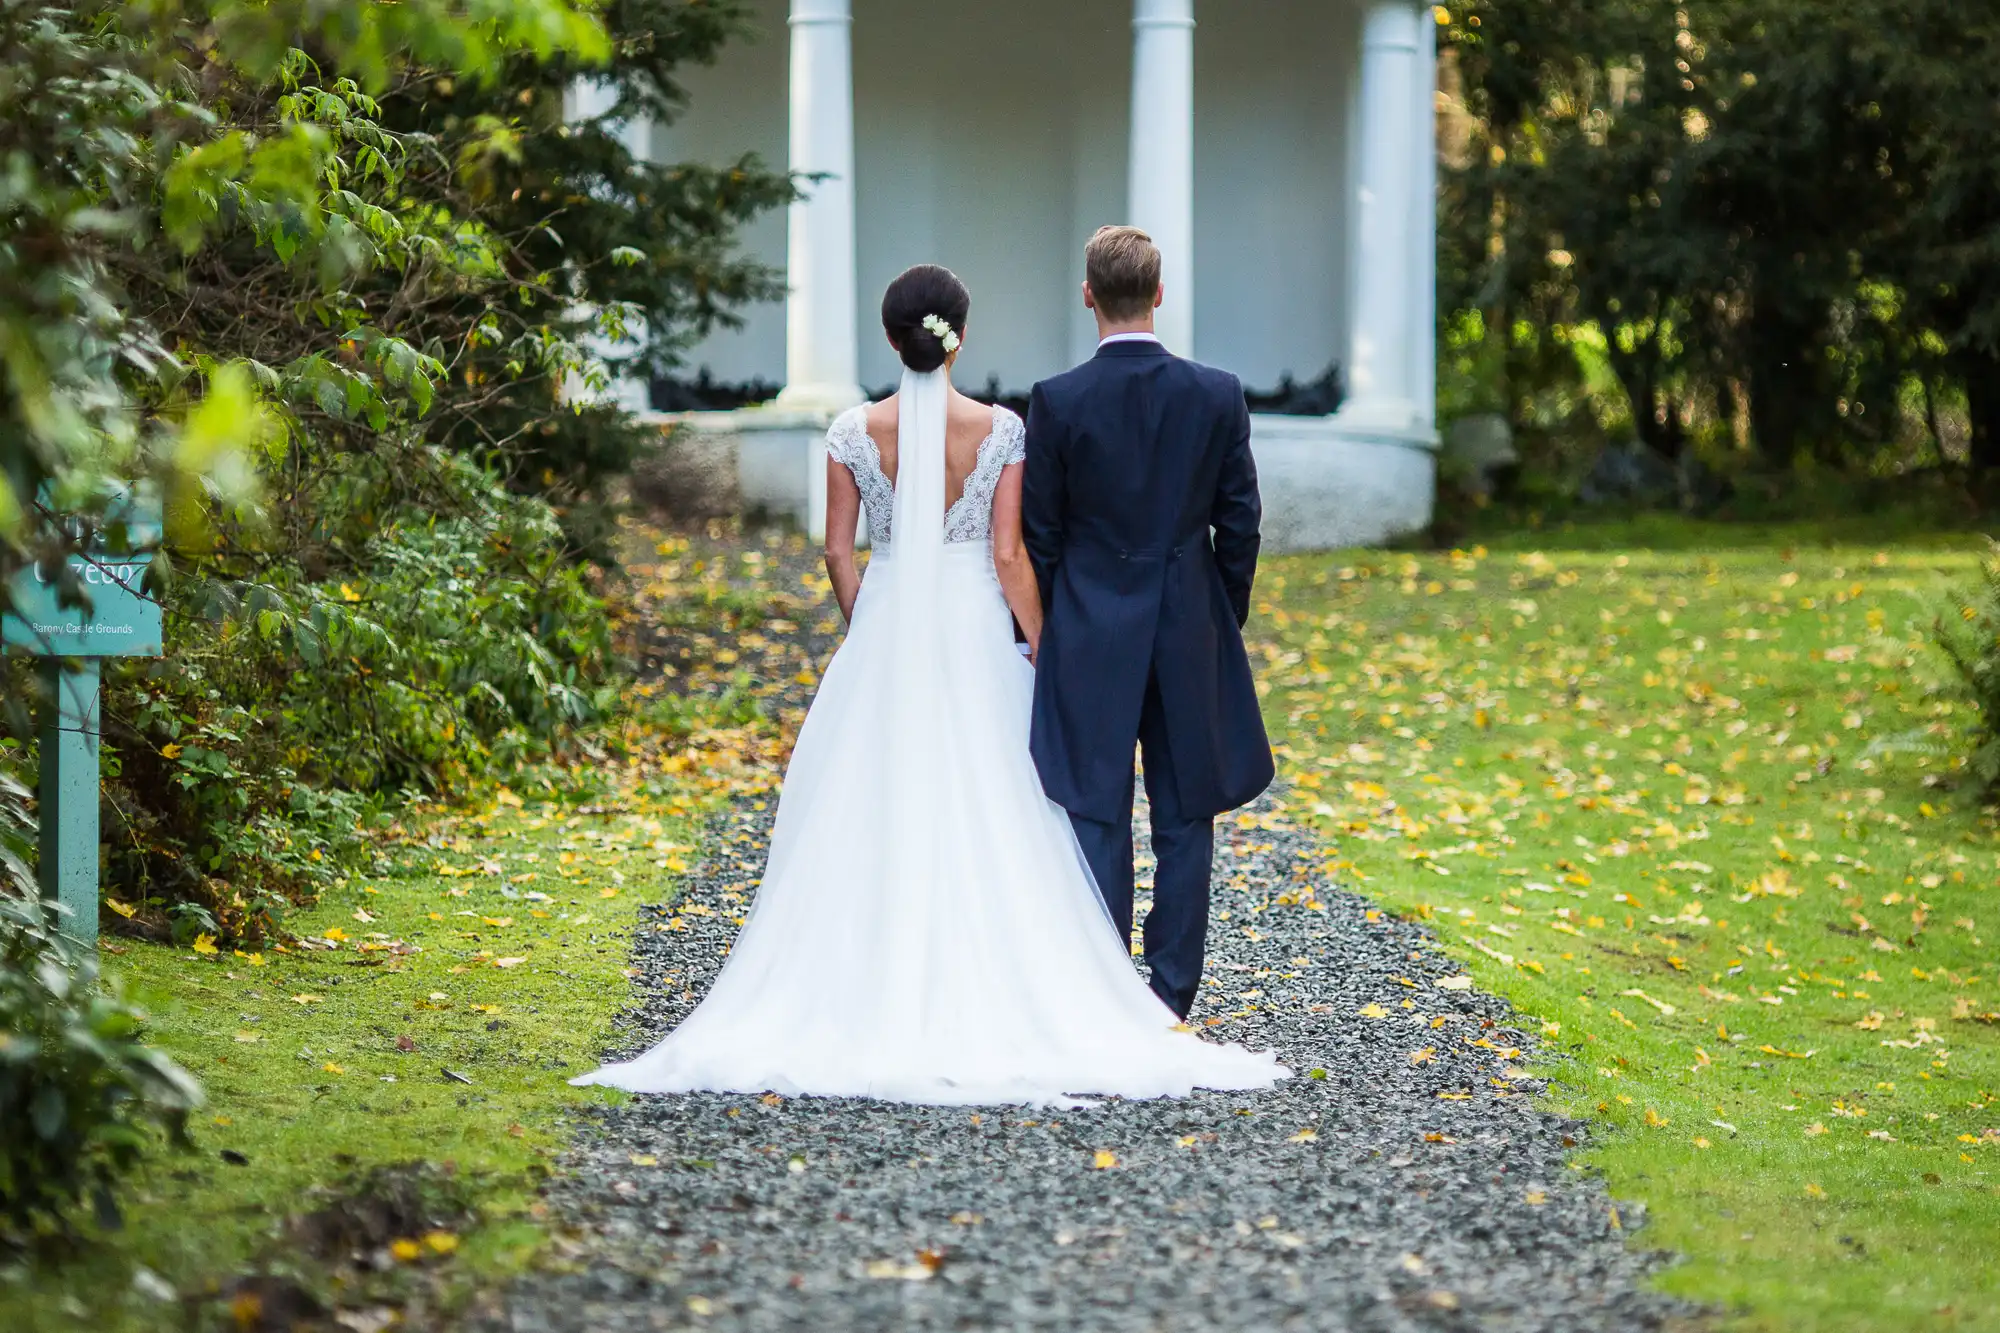 A bride and groom walking hand in hand toward a white gazebo in a garden, viewed from behind.